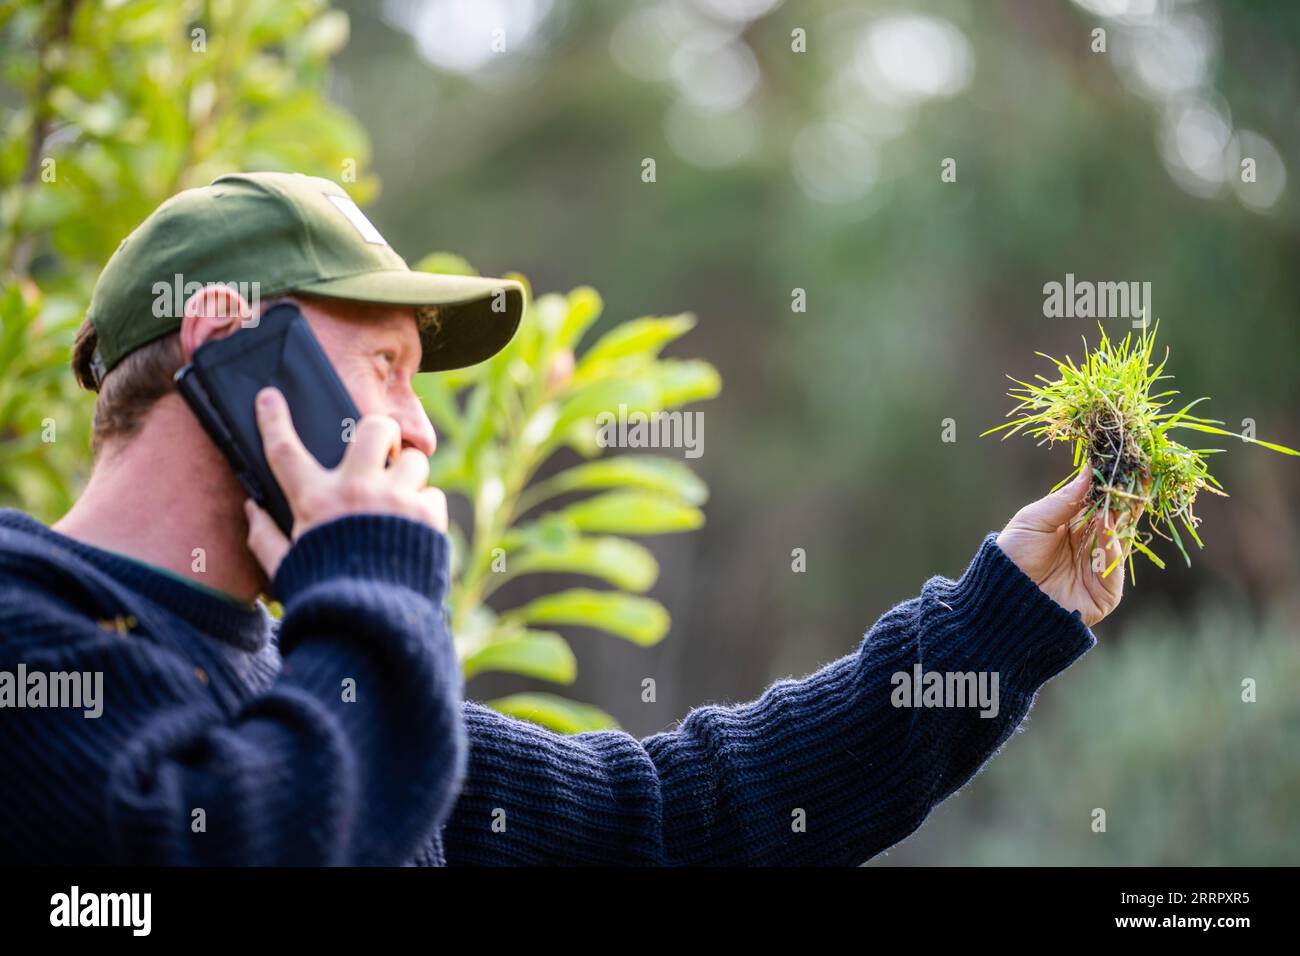 scientist agronomist farmer looking at soil samples and grass in a field in spring. looking at growth of plants and soil health, using a phone and tec Stock Photo